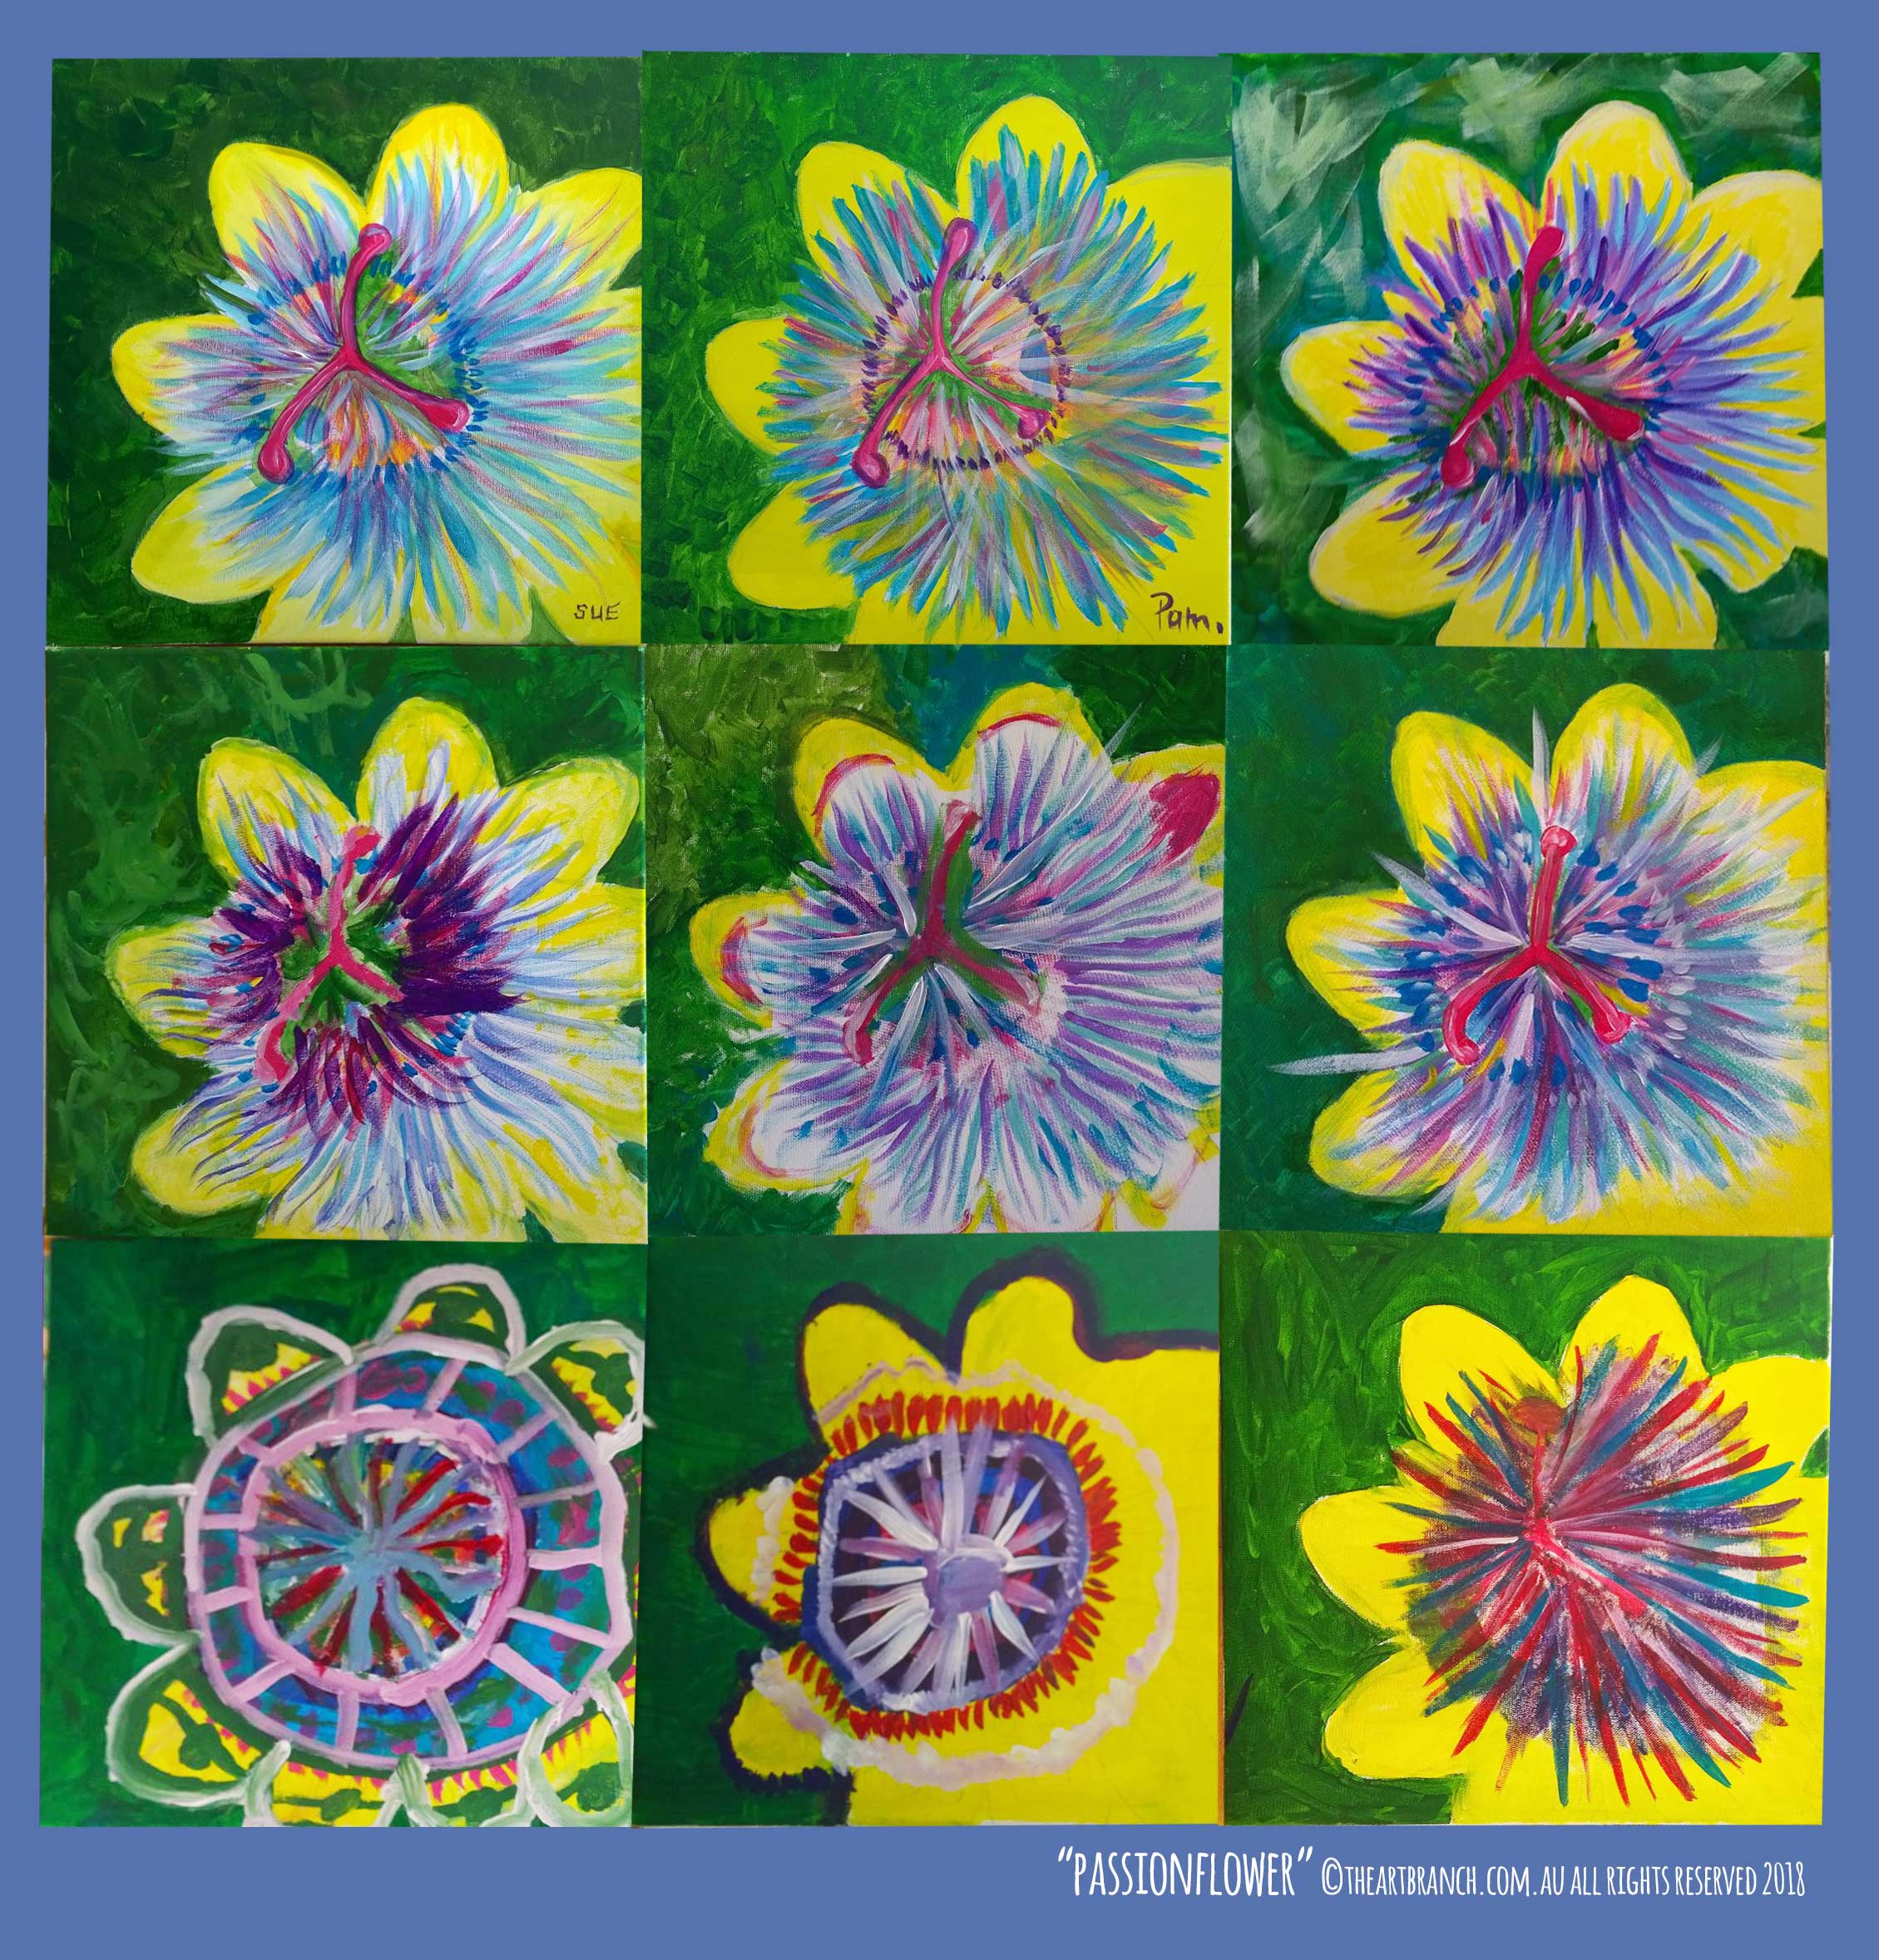 theartbranchpassionflower1.jpg